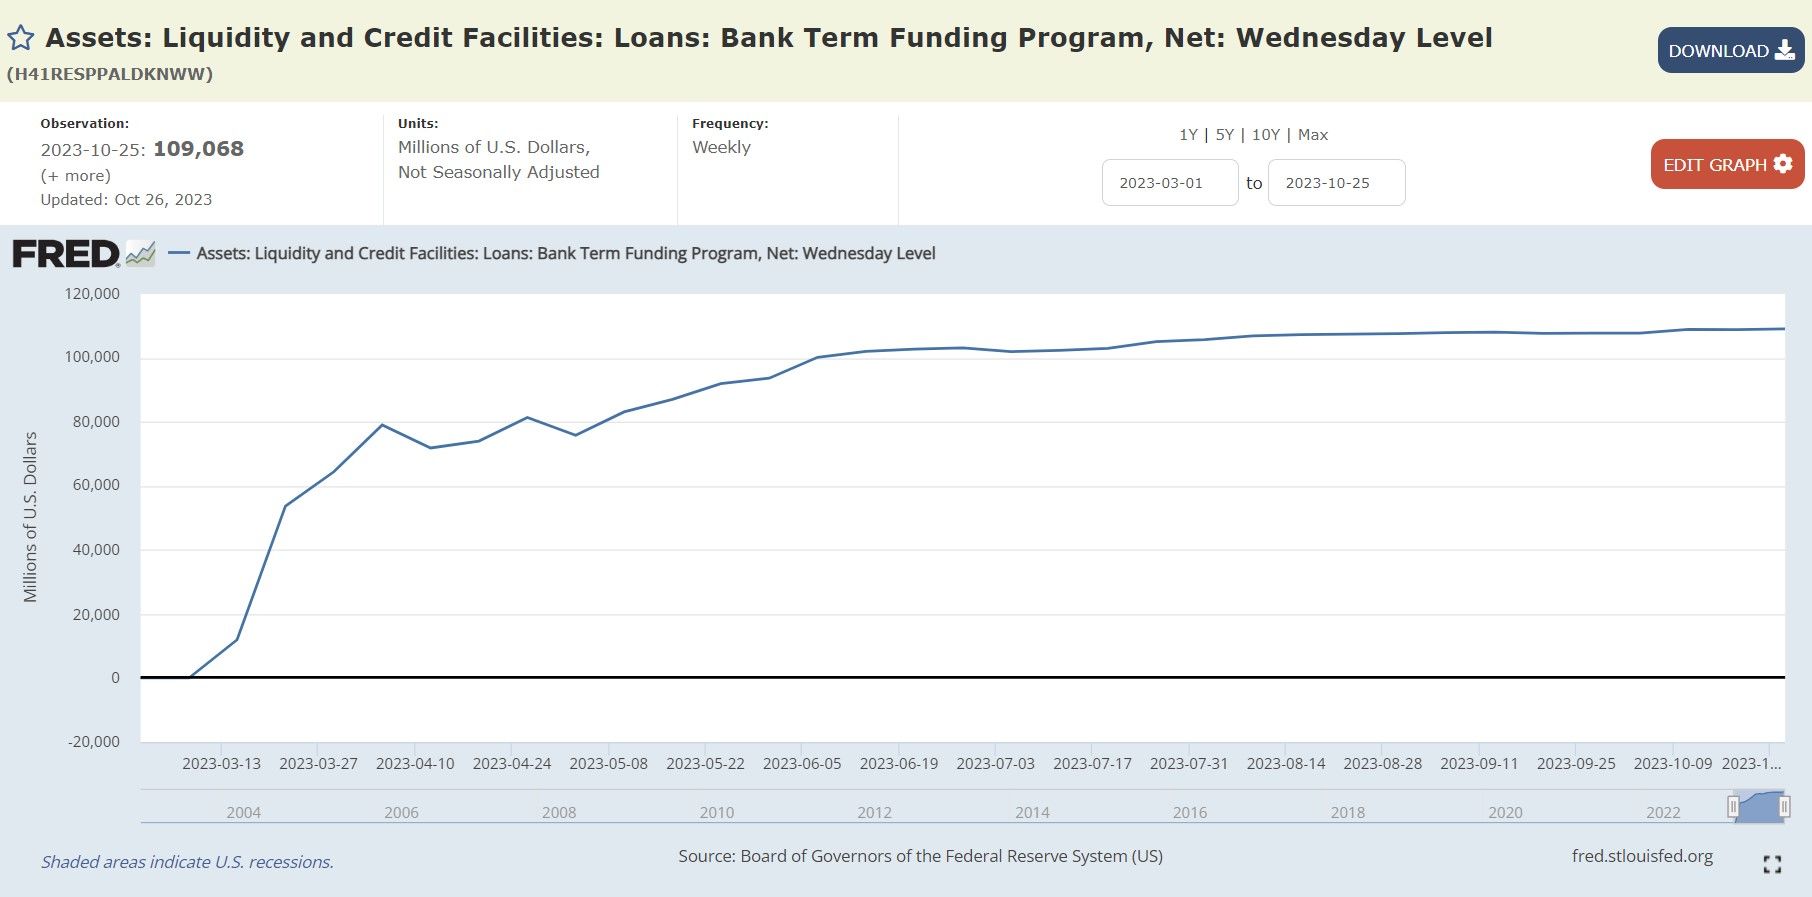 Assets: Liquidity and Credit Facilities: Loans: Bank Term Funding Program, Net: Wednesday Level